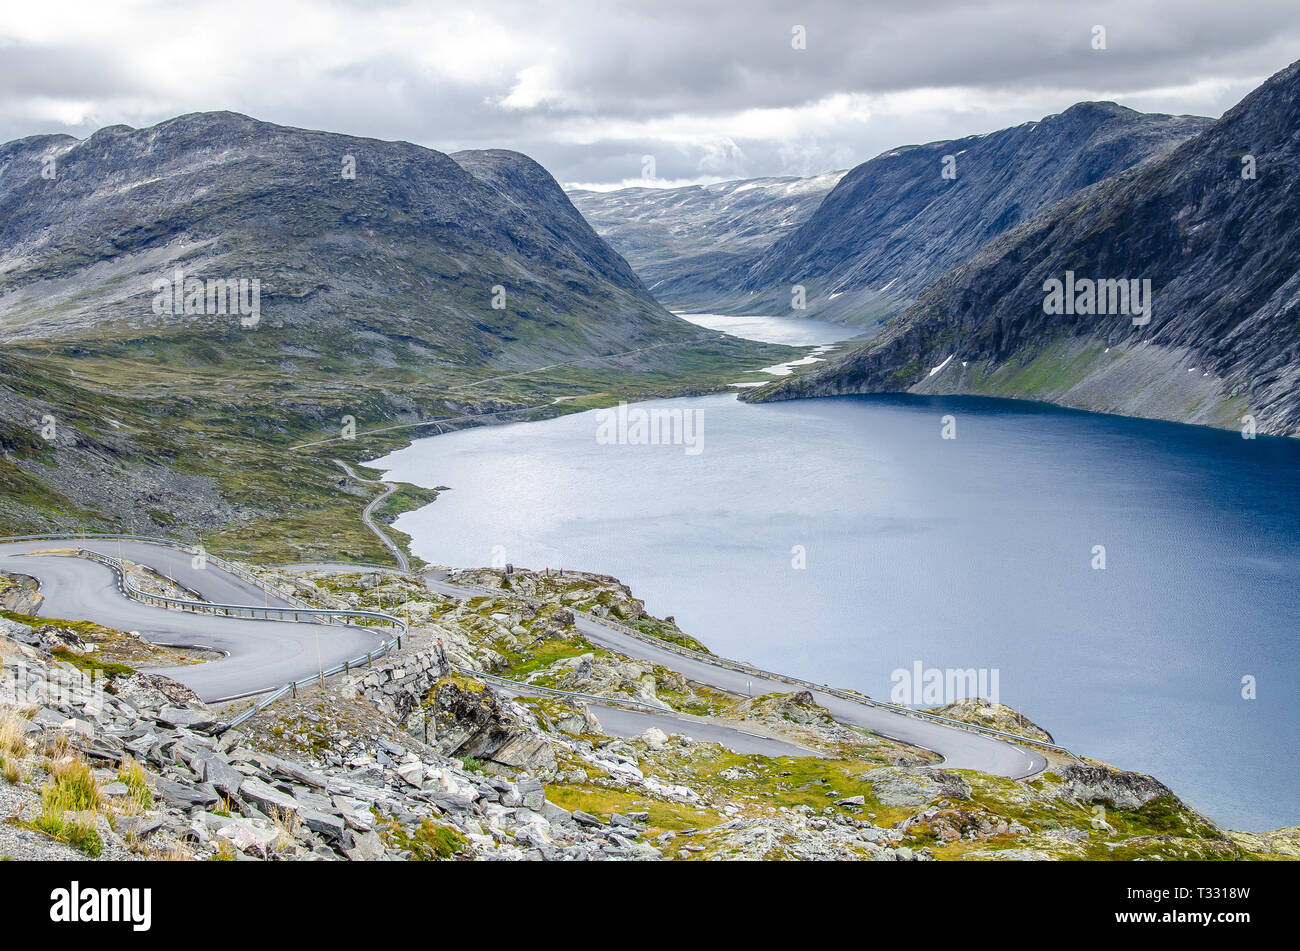 View of a lake and glacier valley from the road leading to the Dalsnibba viewpoint with mountains behind. Stock Photo